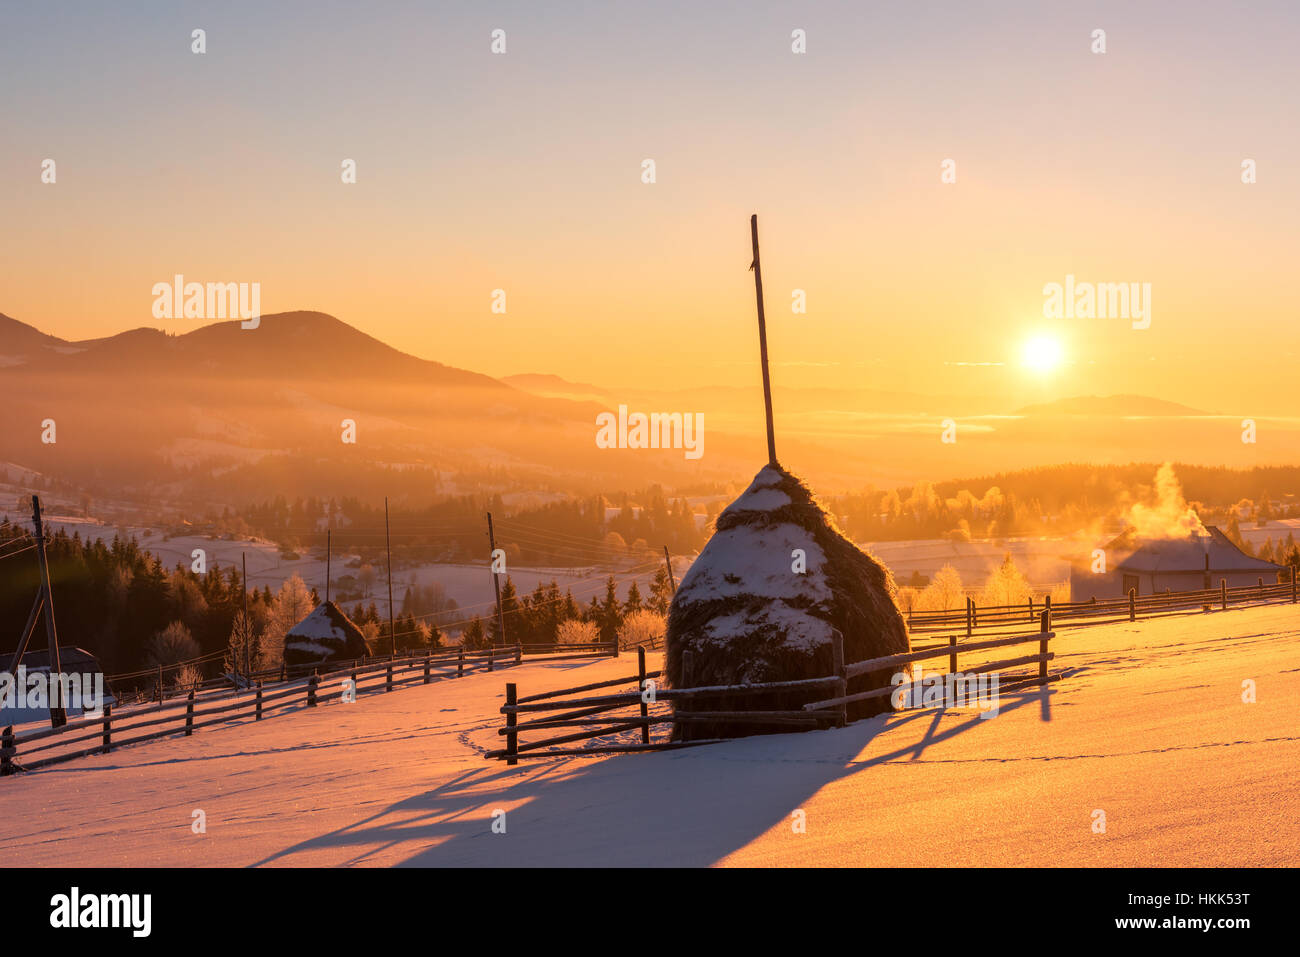 Alone haystack in winter mountains with beauty orange sunrise light Stock Photo